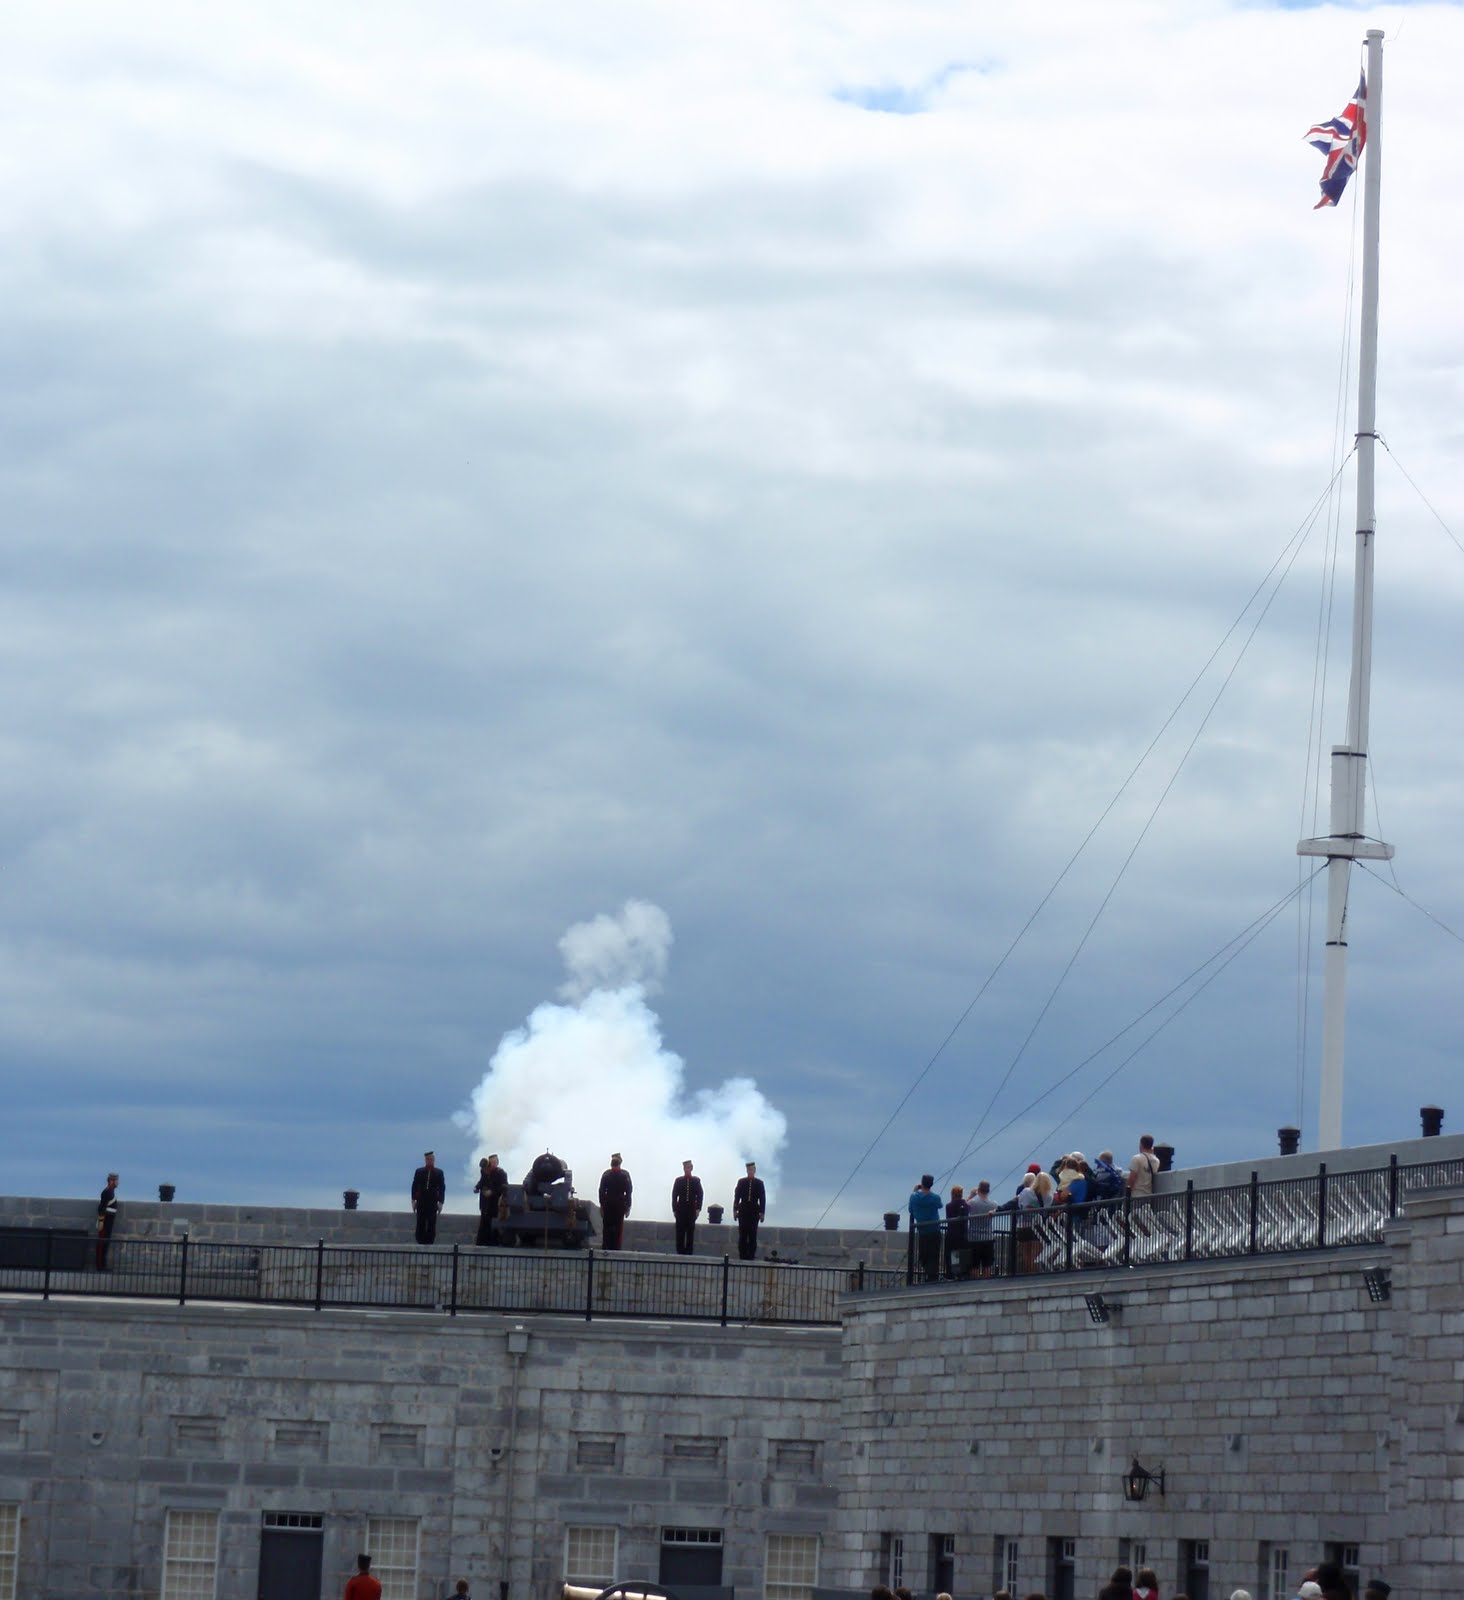 Firing of the canon